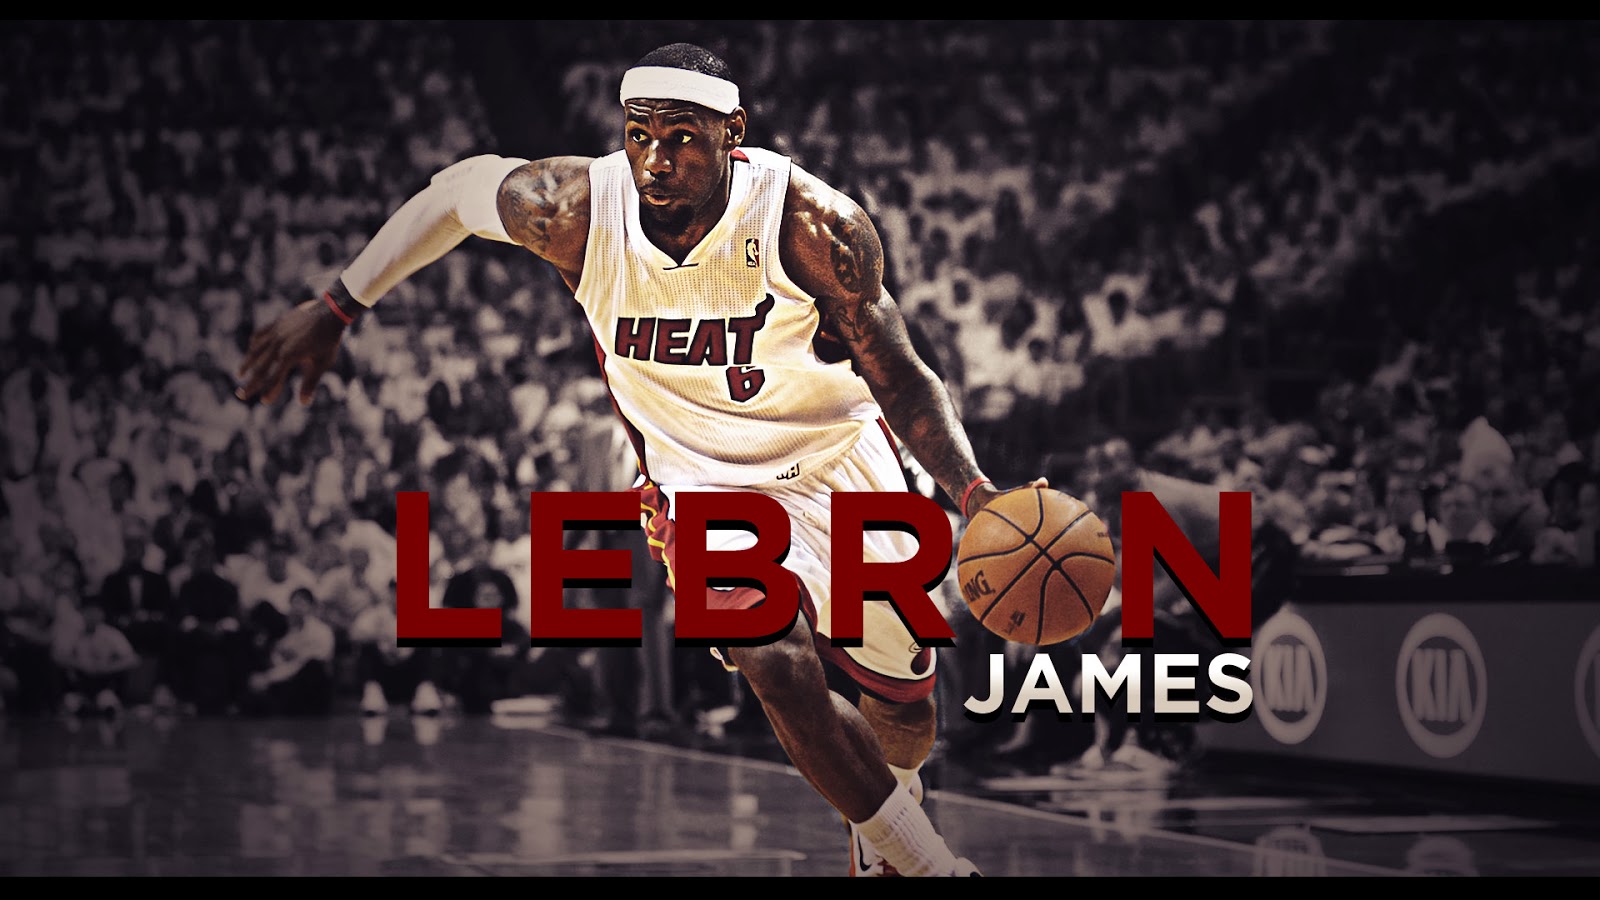 Lebron James New Wallpaper 2014   Its All About Basketball